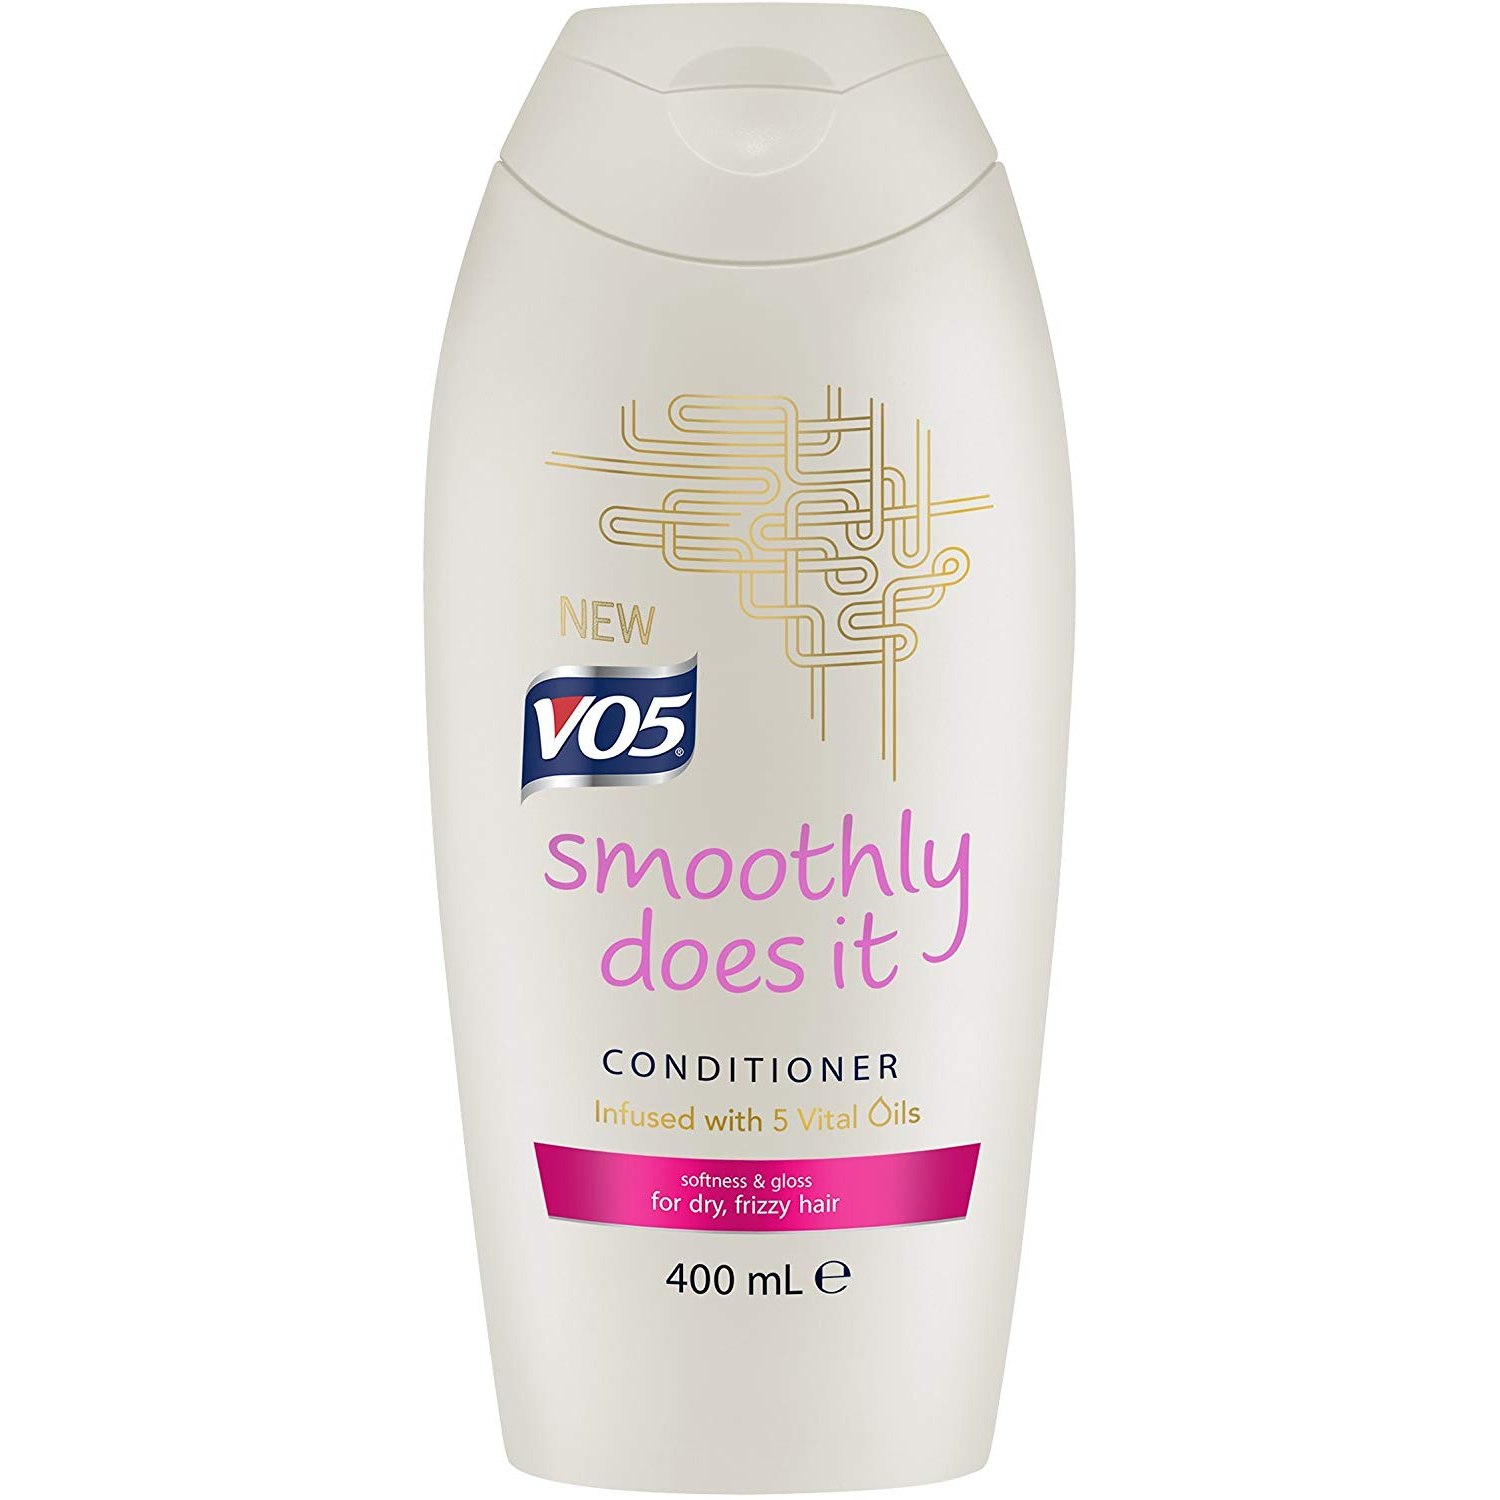 VO5 Smoothly Does It: Conditioner (400ml)